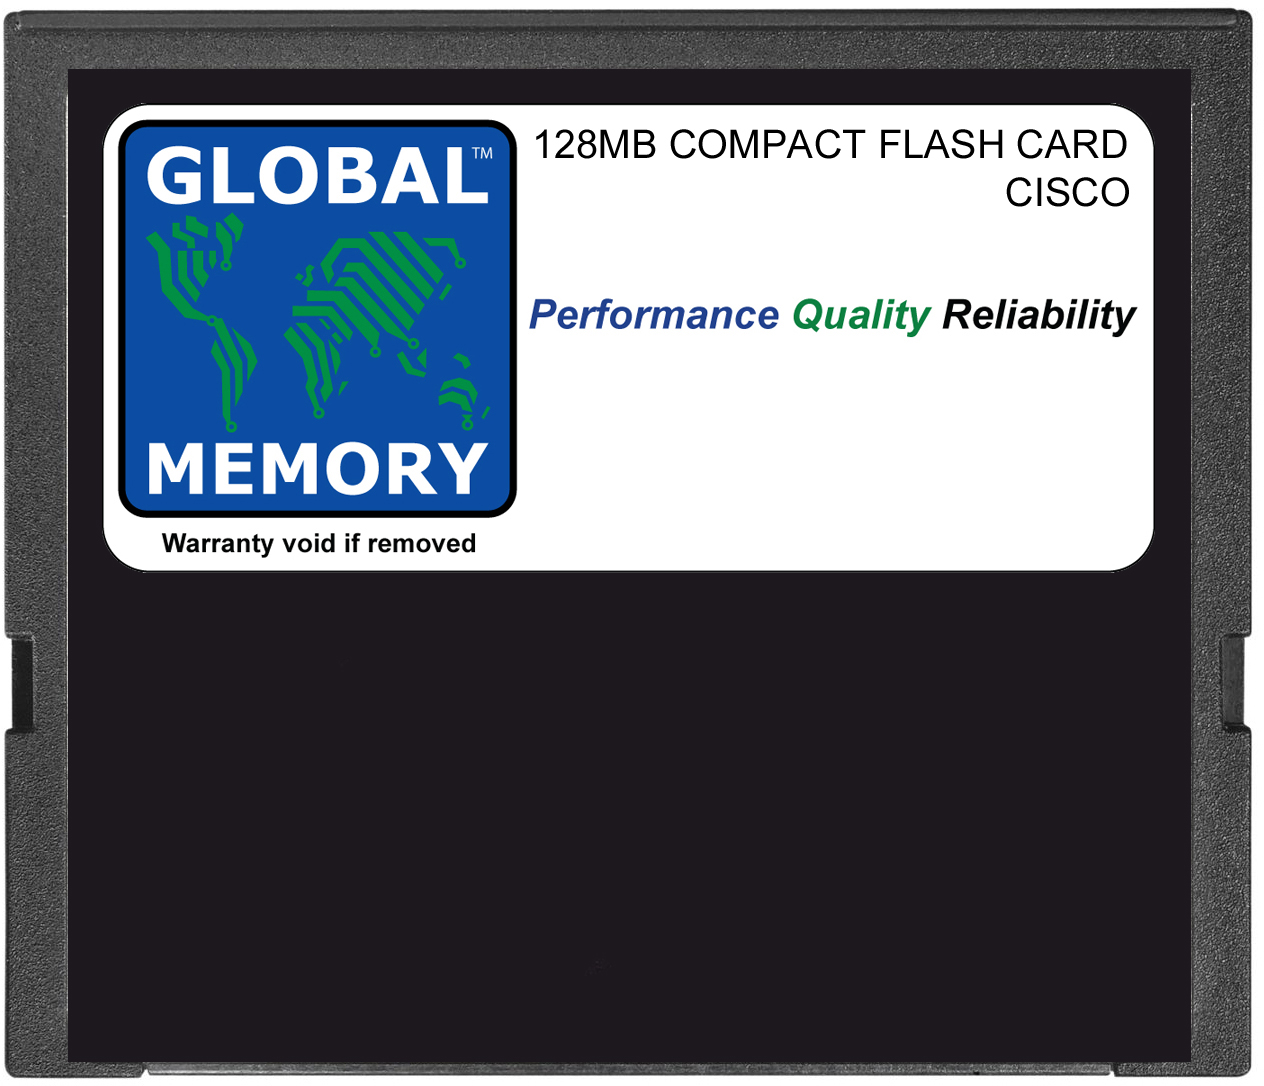 128MB COMPACT FLASH CARD MEMORY FOR CISCO 7200 SERIES ROUTERS NPE-G1 (MEM-NPE-G1-FLD128)